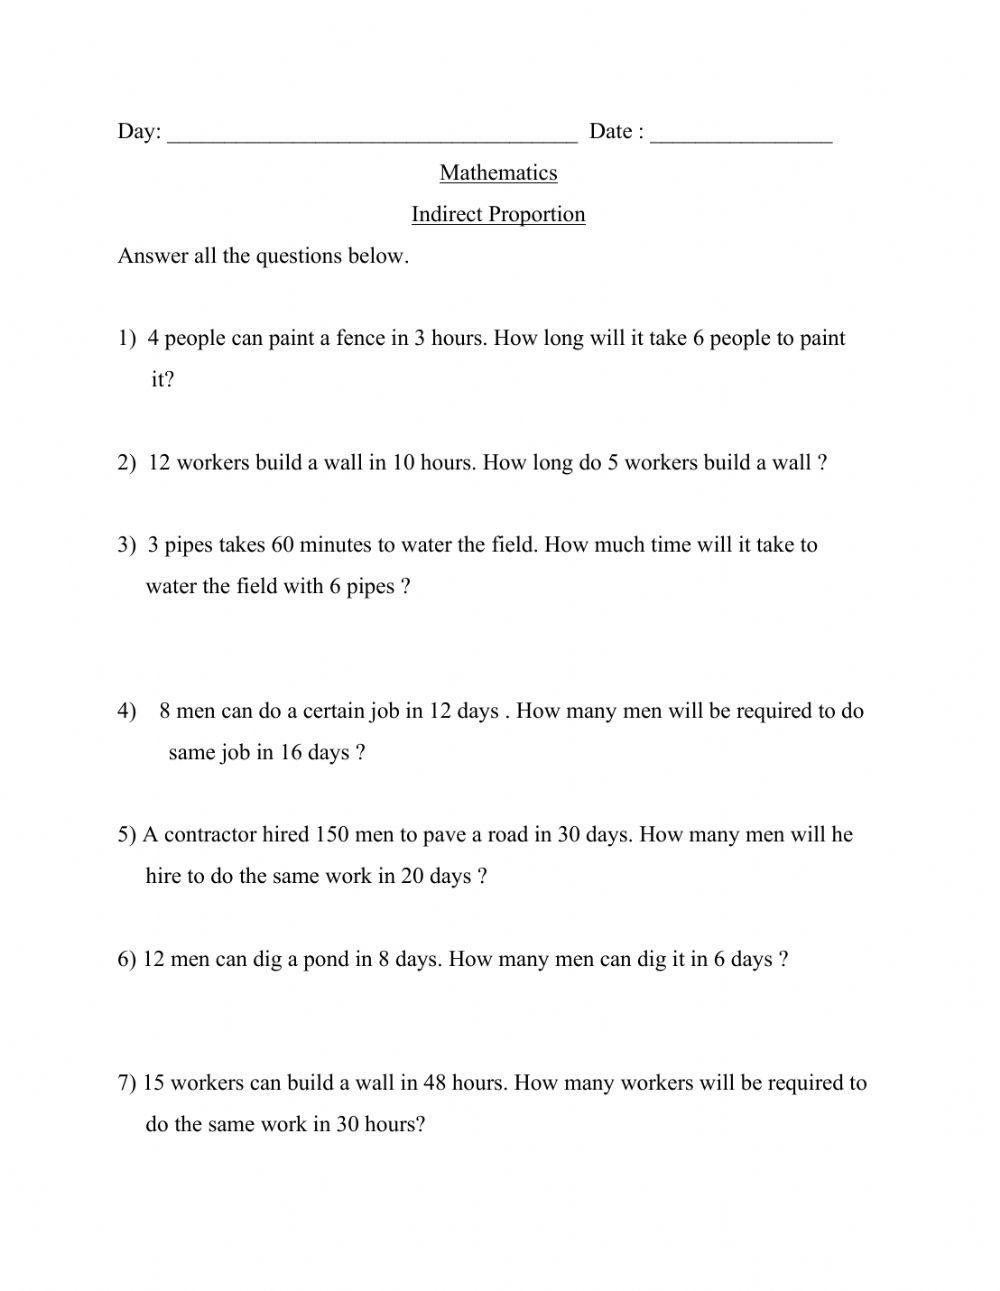 Inverse proportion word problem